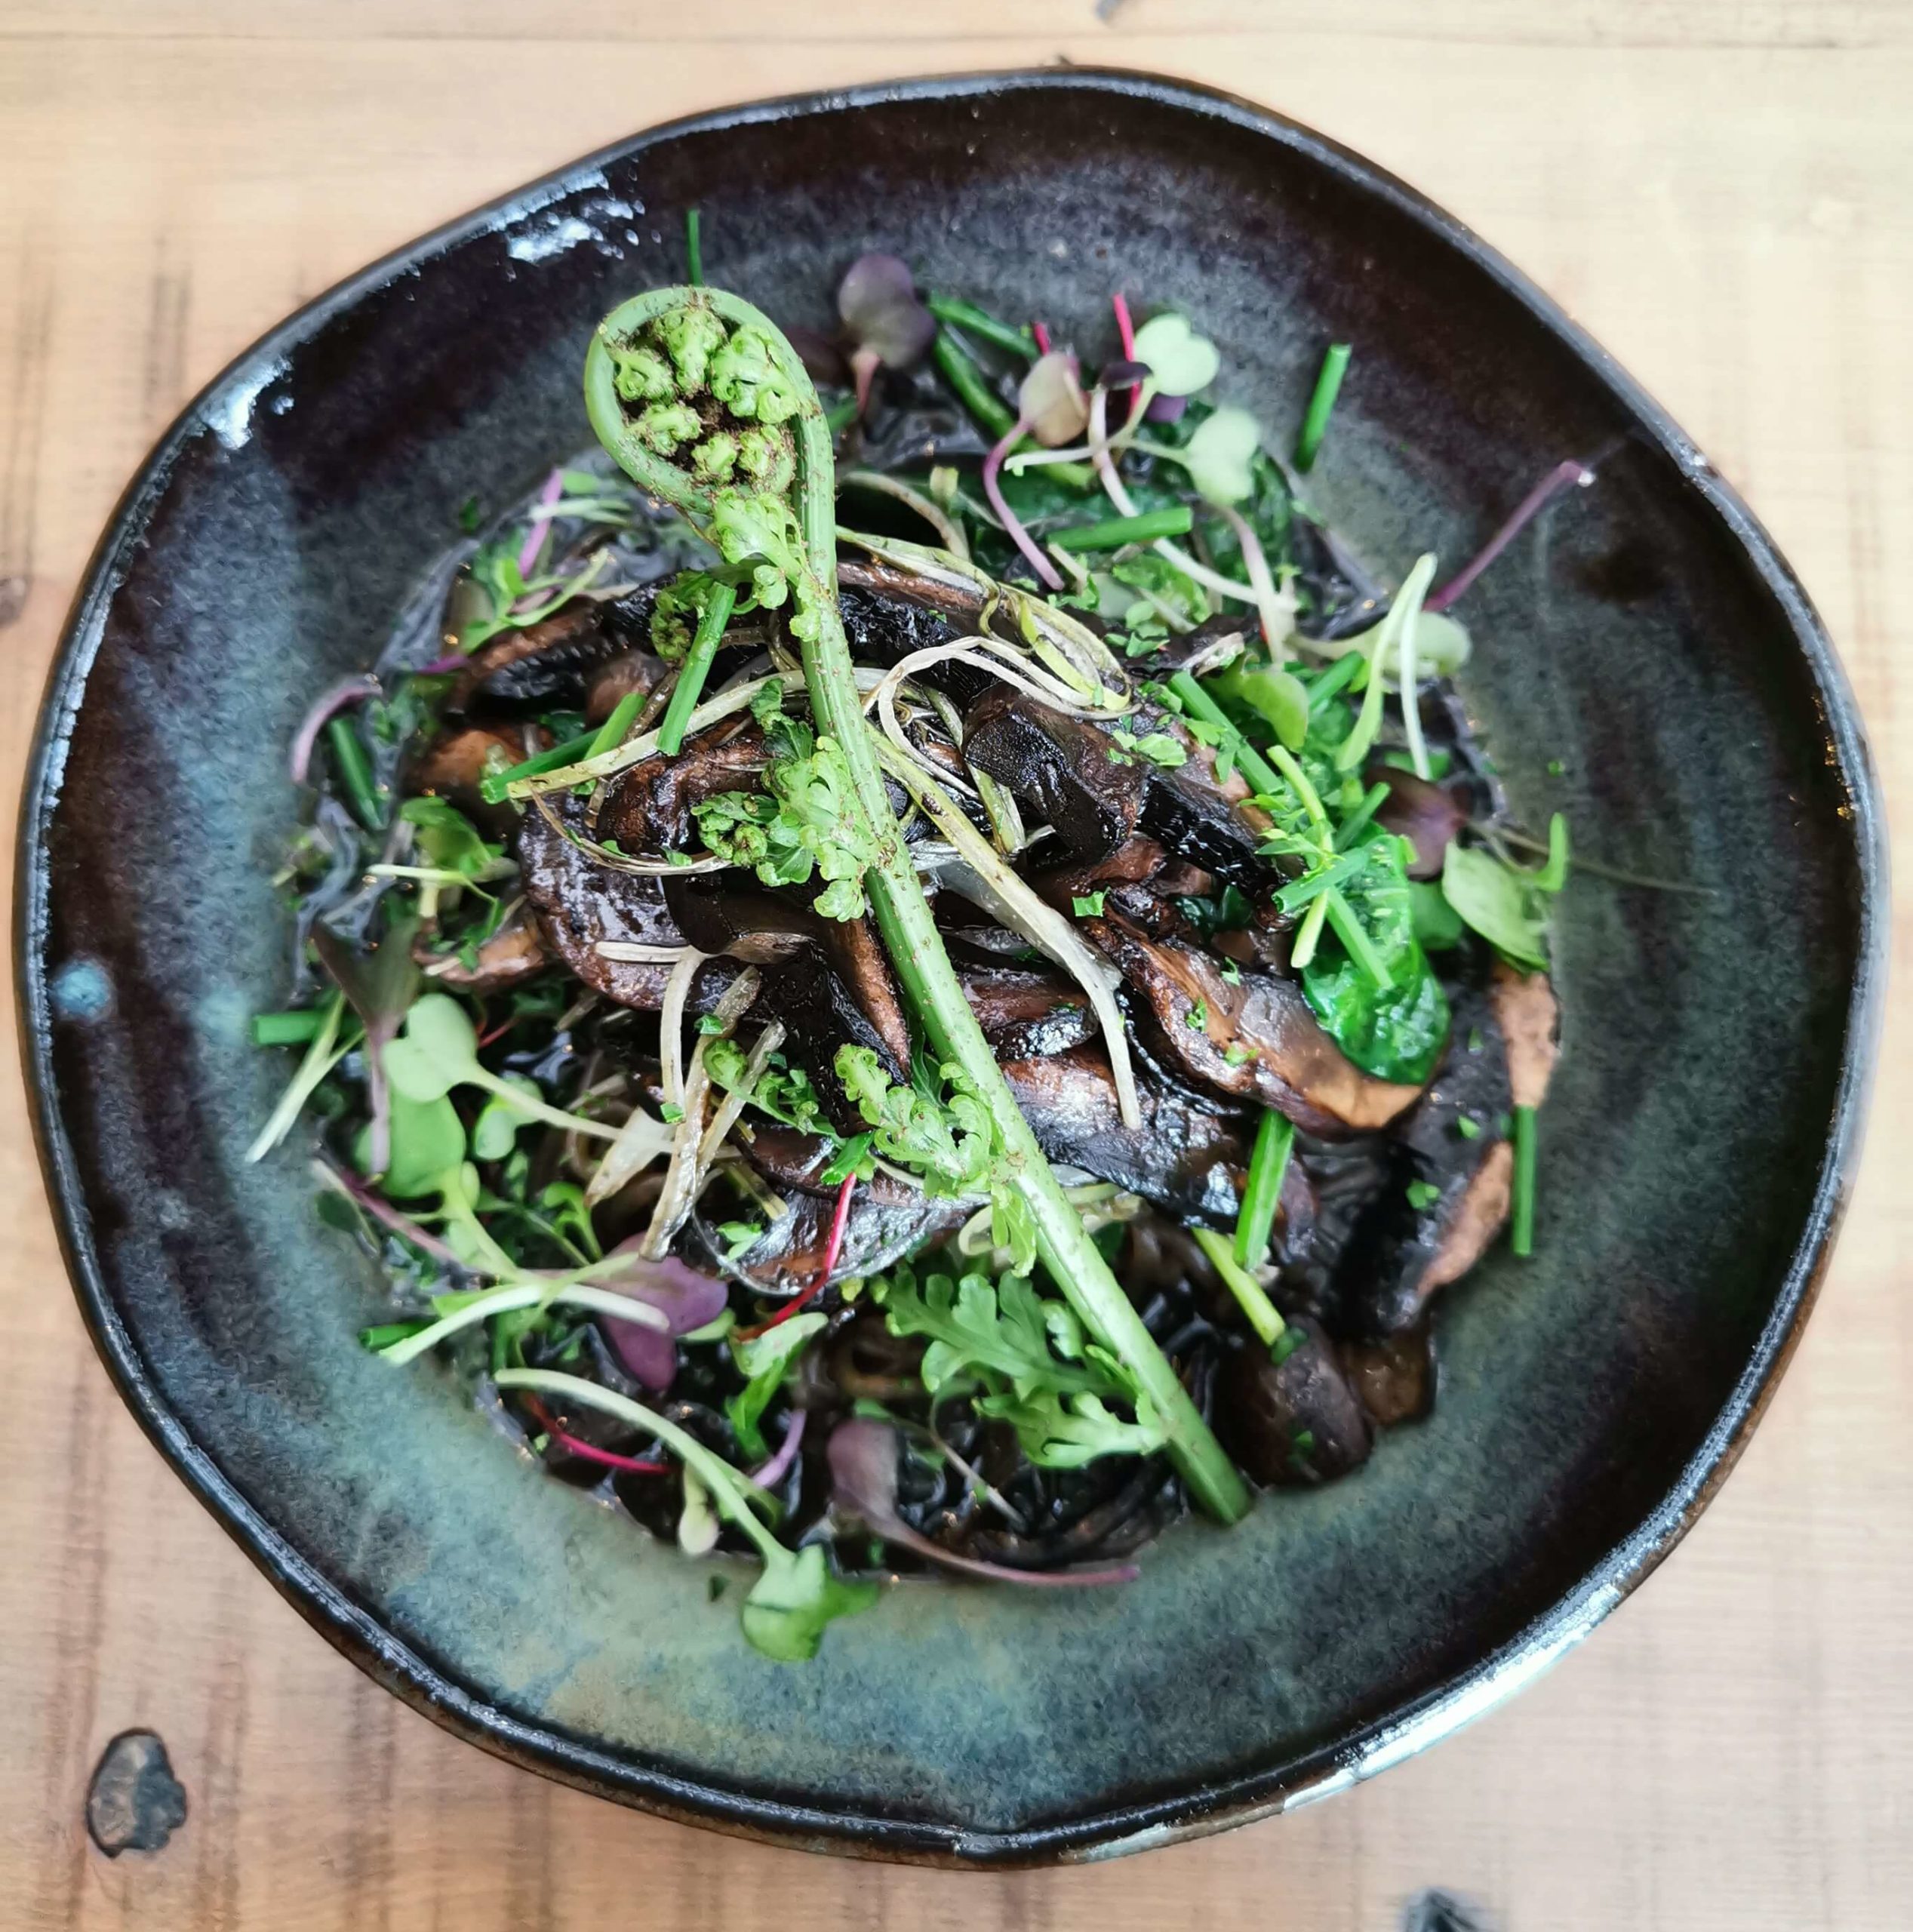 Auckland plant based eatery's mushrooms - three kinds of mushrooms with black garlic and pine nuts